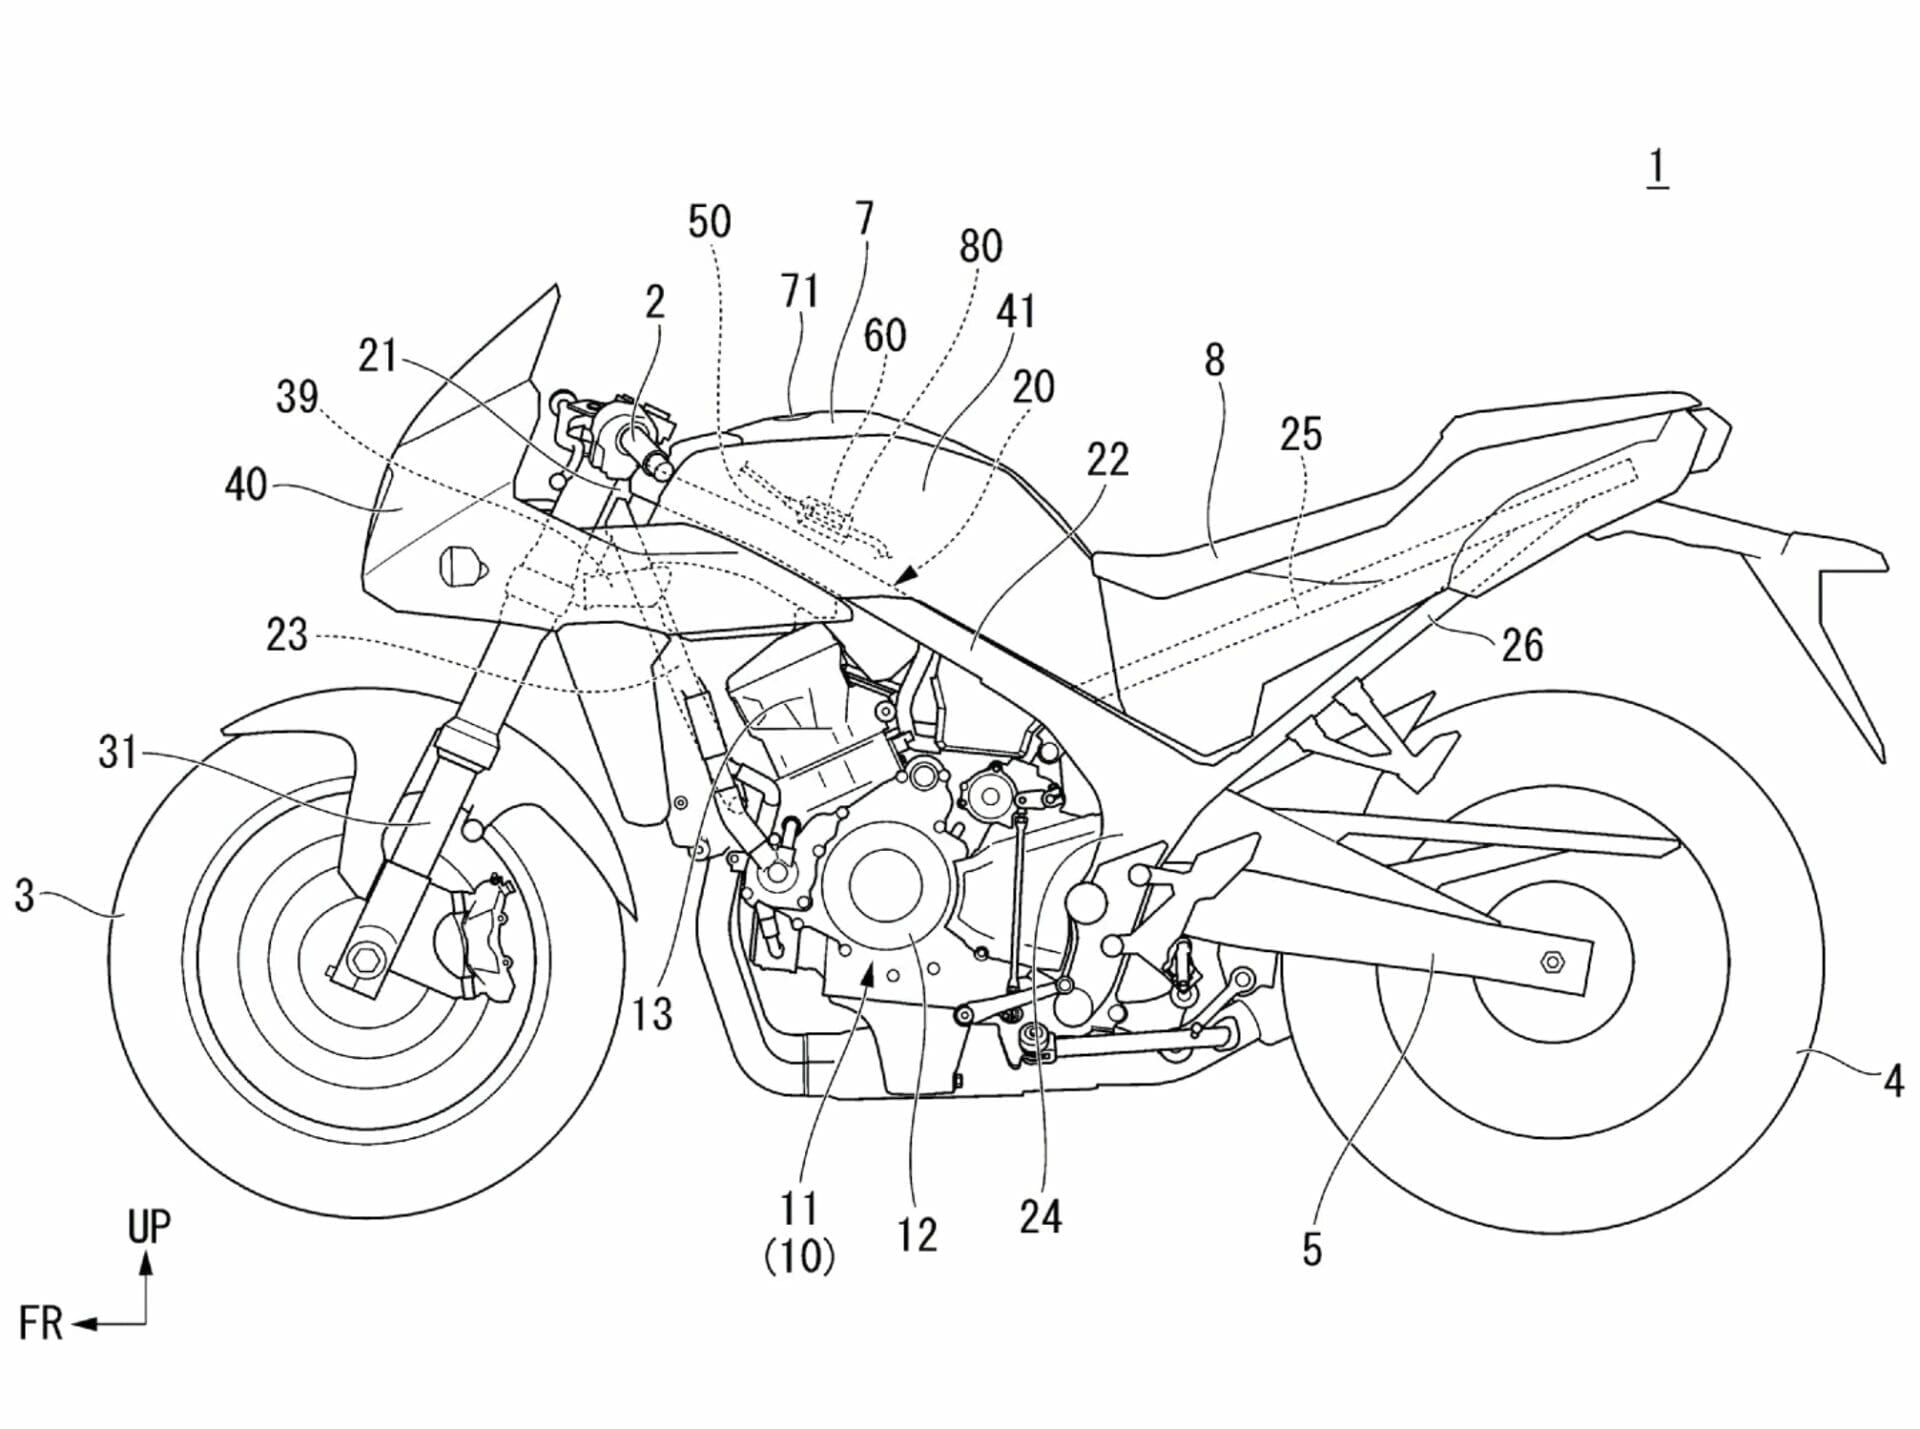 Honda may be working on a CBR750R based on the Hornet